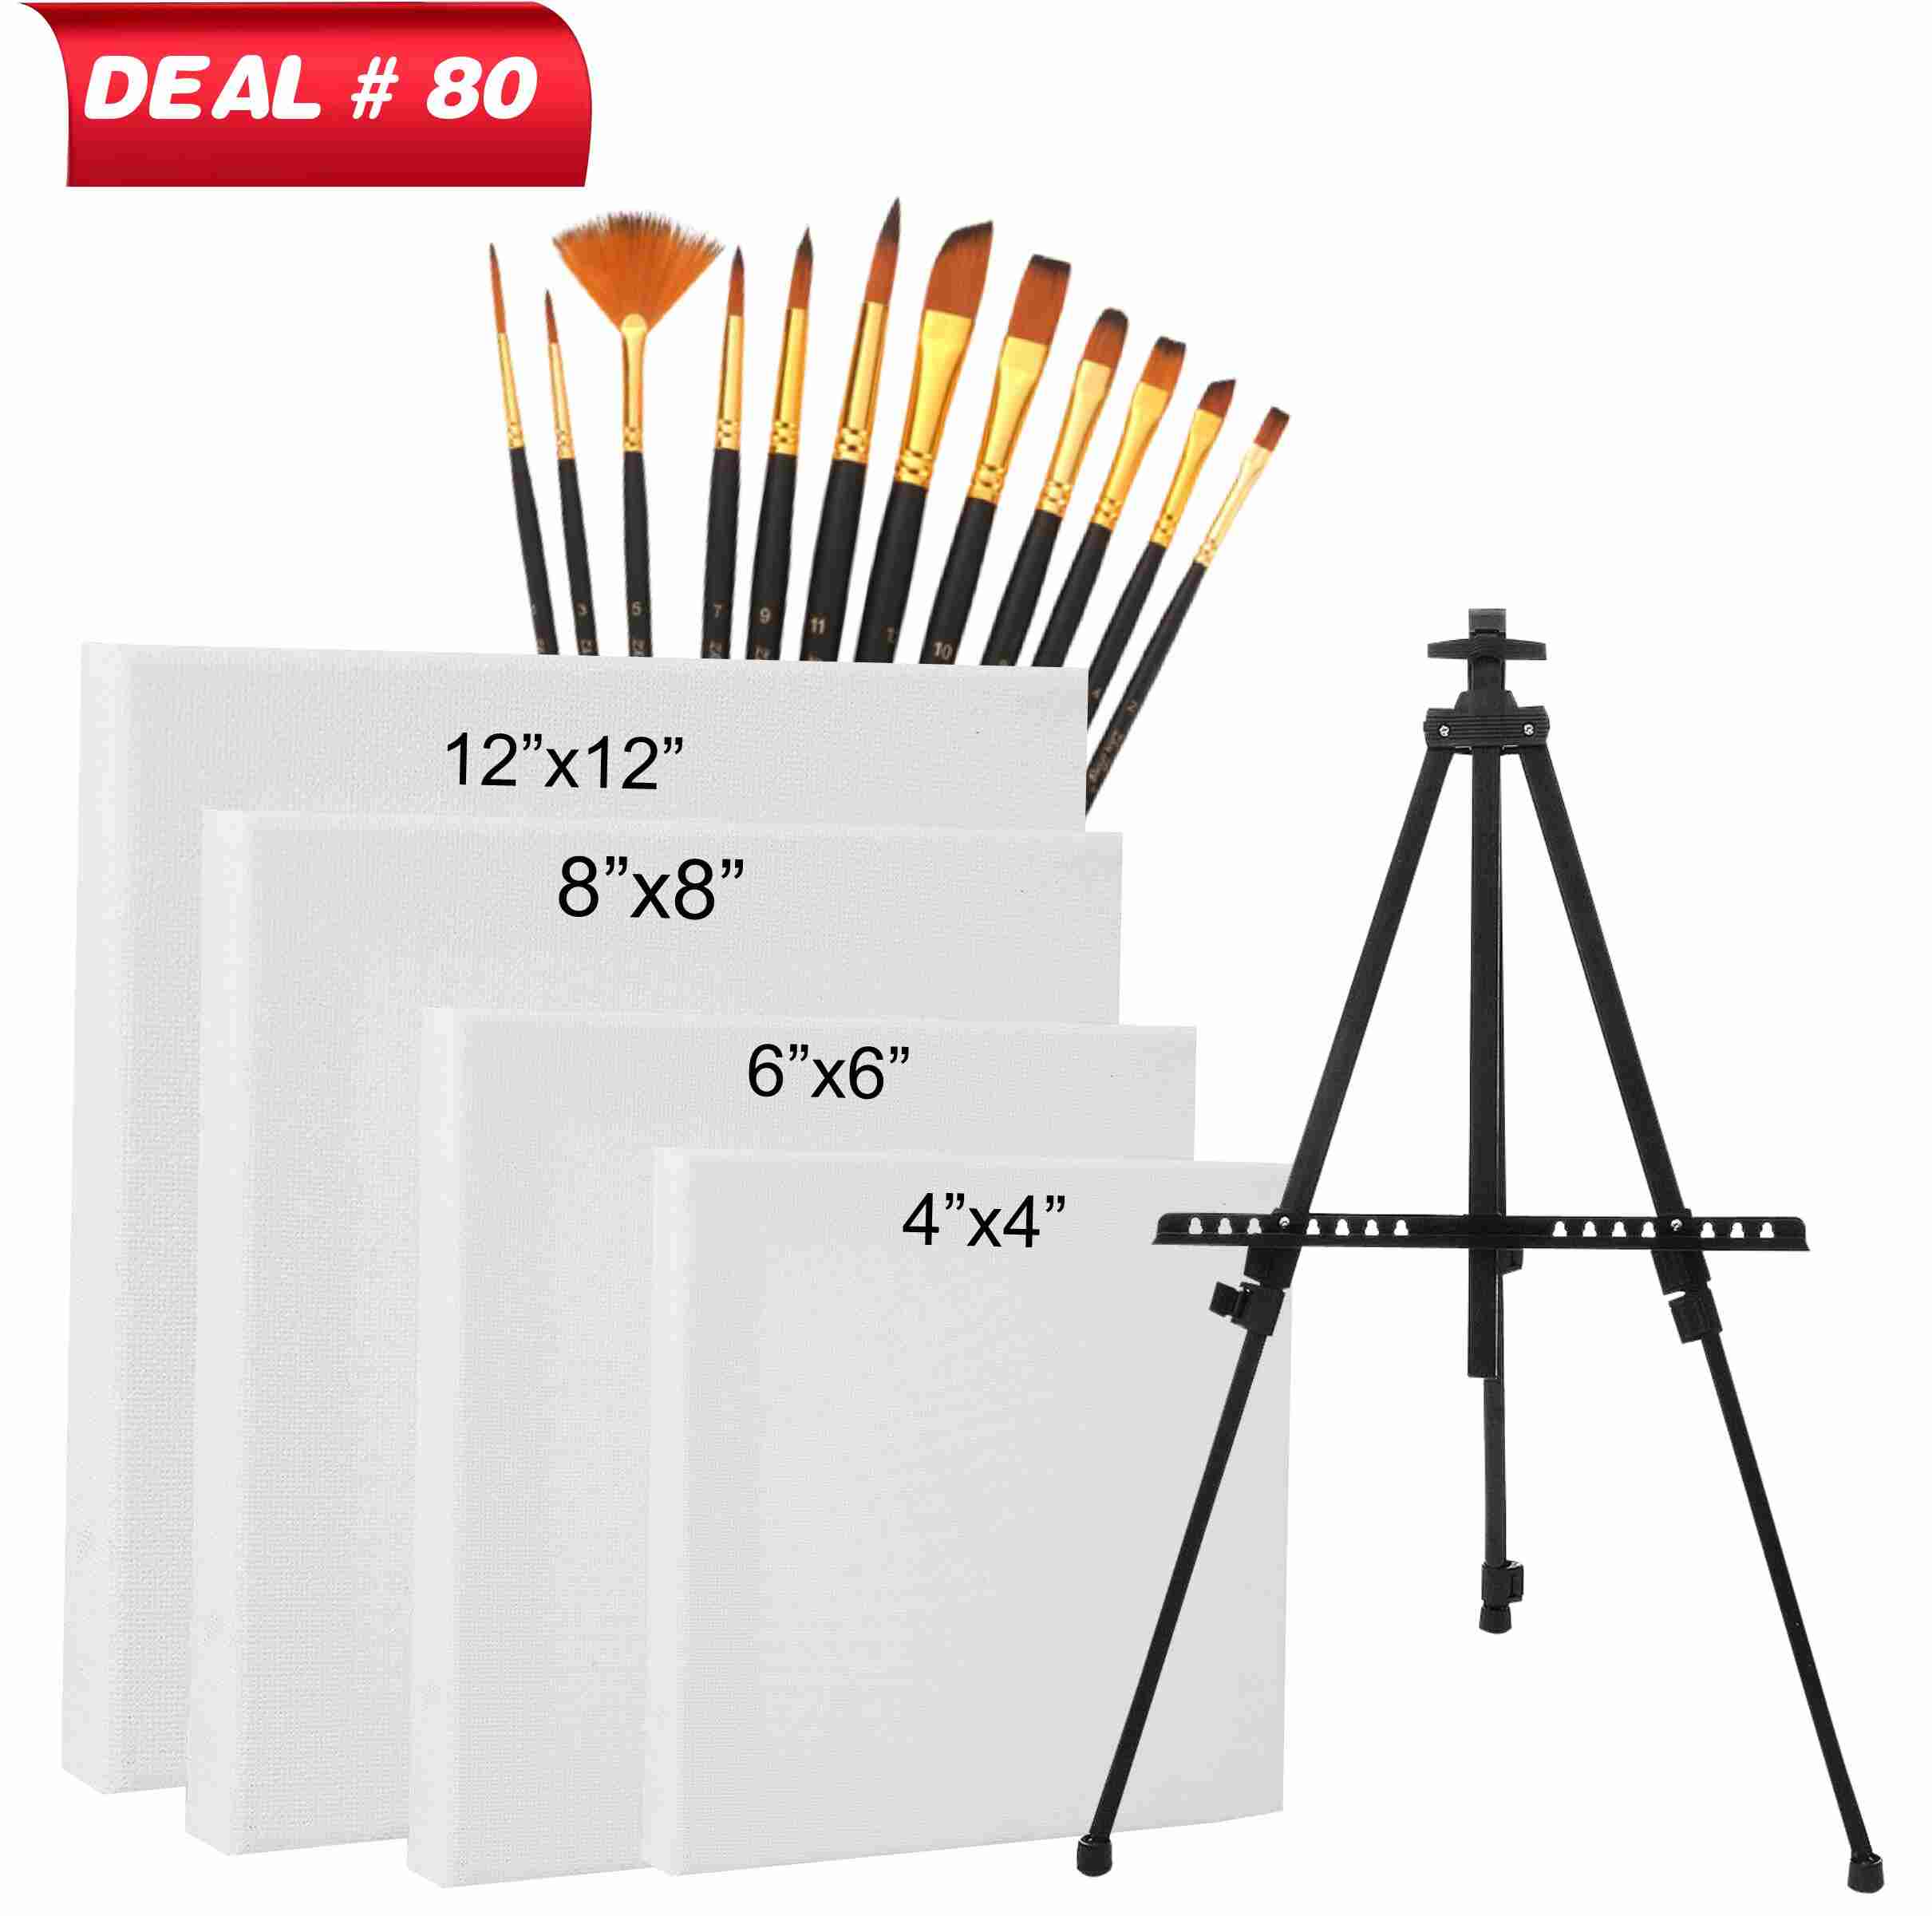 Acrylic Painting Kit For Professional Artist's, Deal No. 62